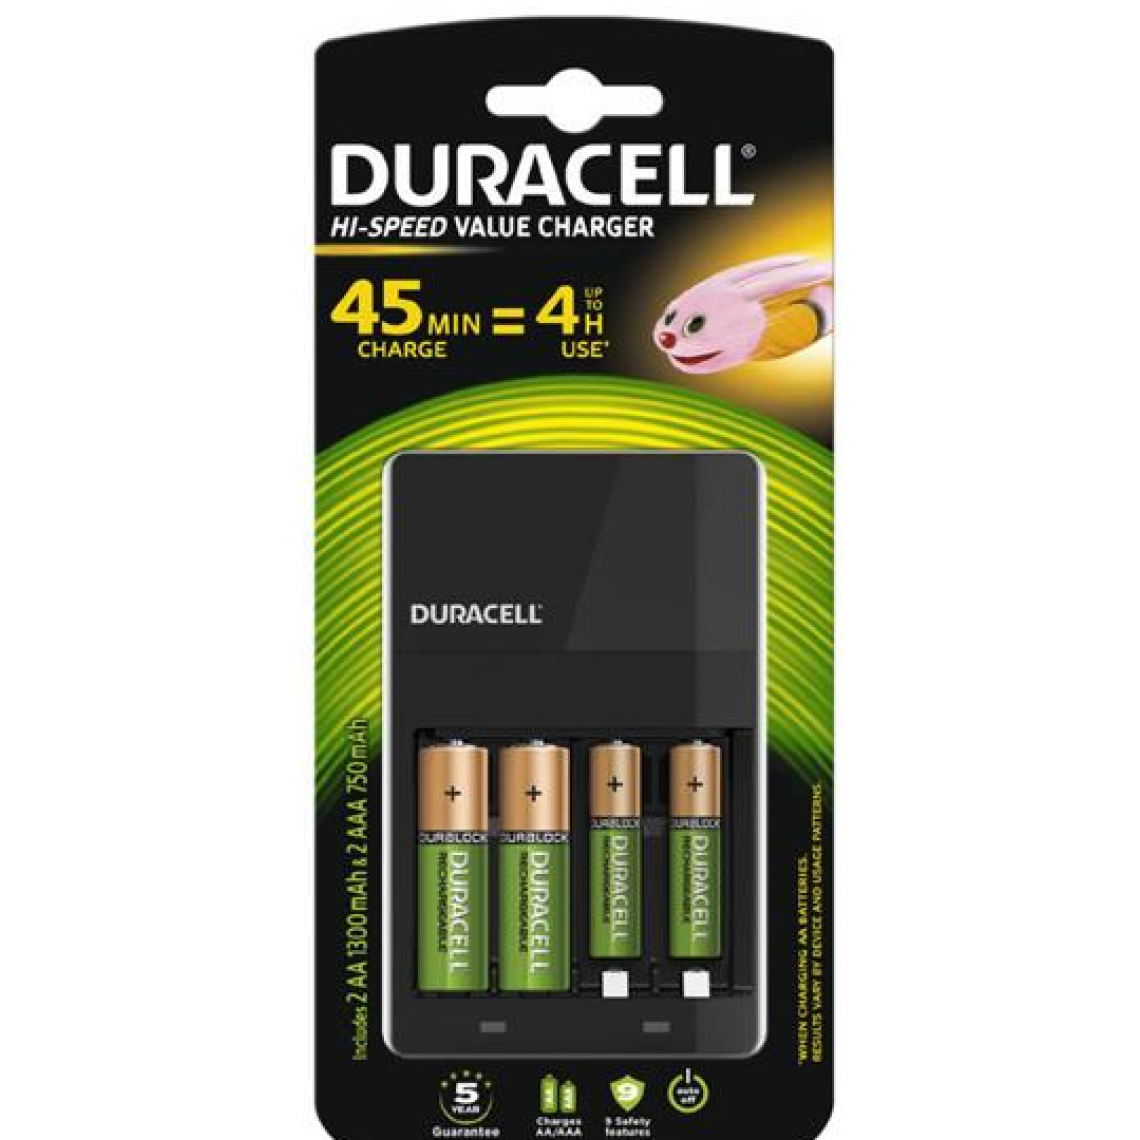 Duracell - Chargeur universel Duracell CEF14, incl. 2xAA 2xAAA - Batteries et chargeurs